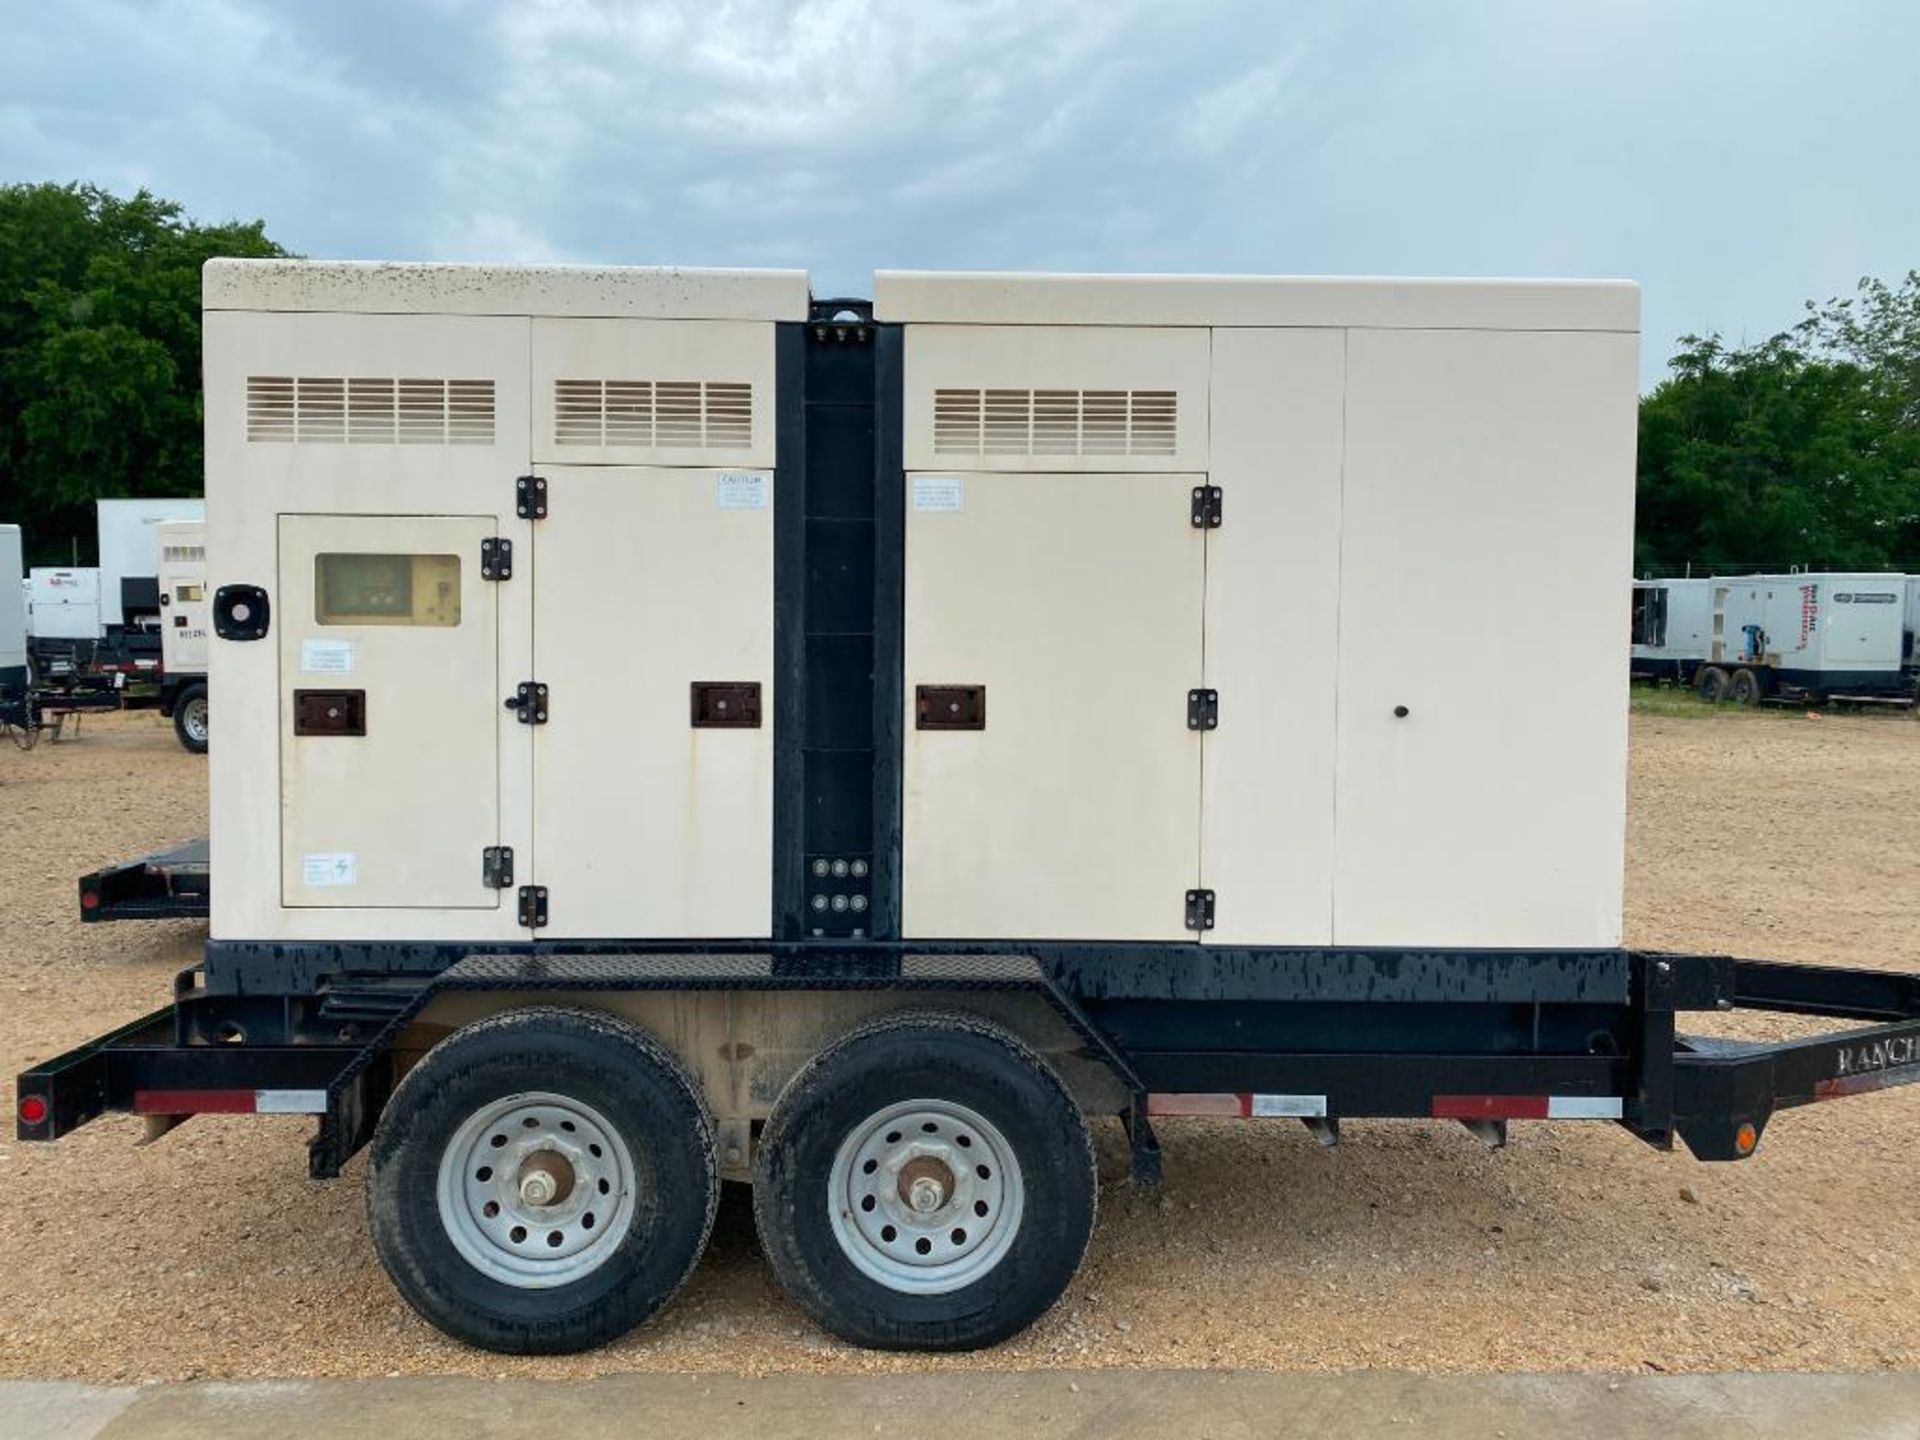 2014 AltaStream Power Systems 125 KVA Towable Generator, Dual Fuel Natural Gas or LP, Model APHG150- - Image 3 of 12